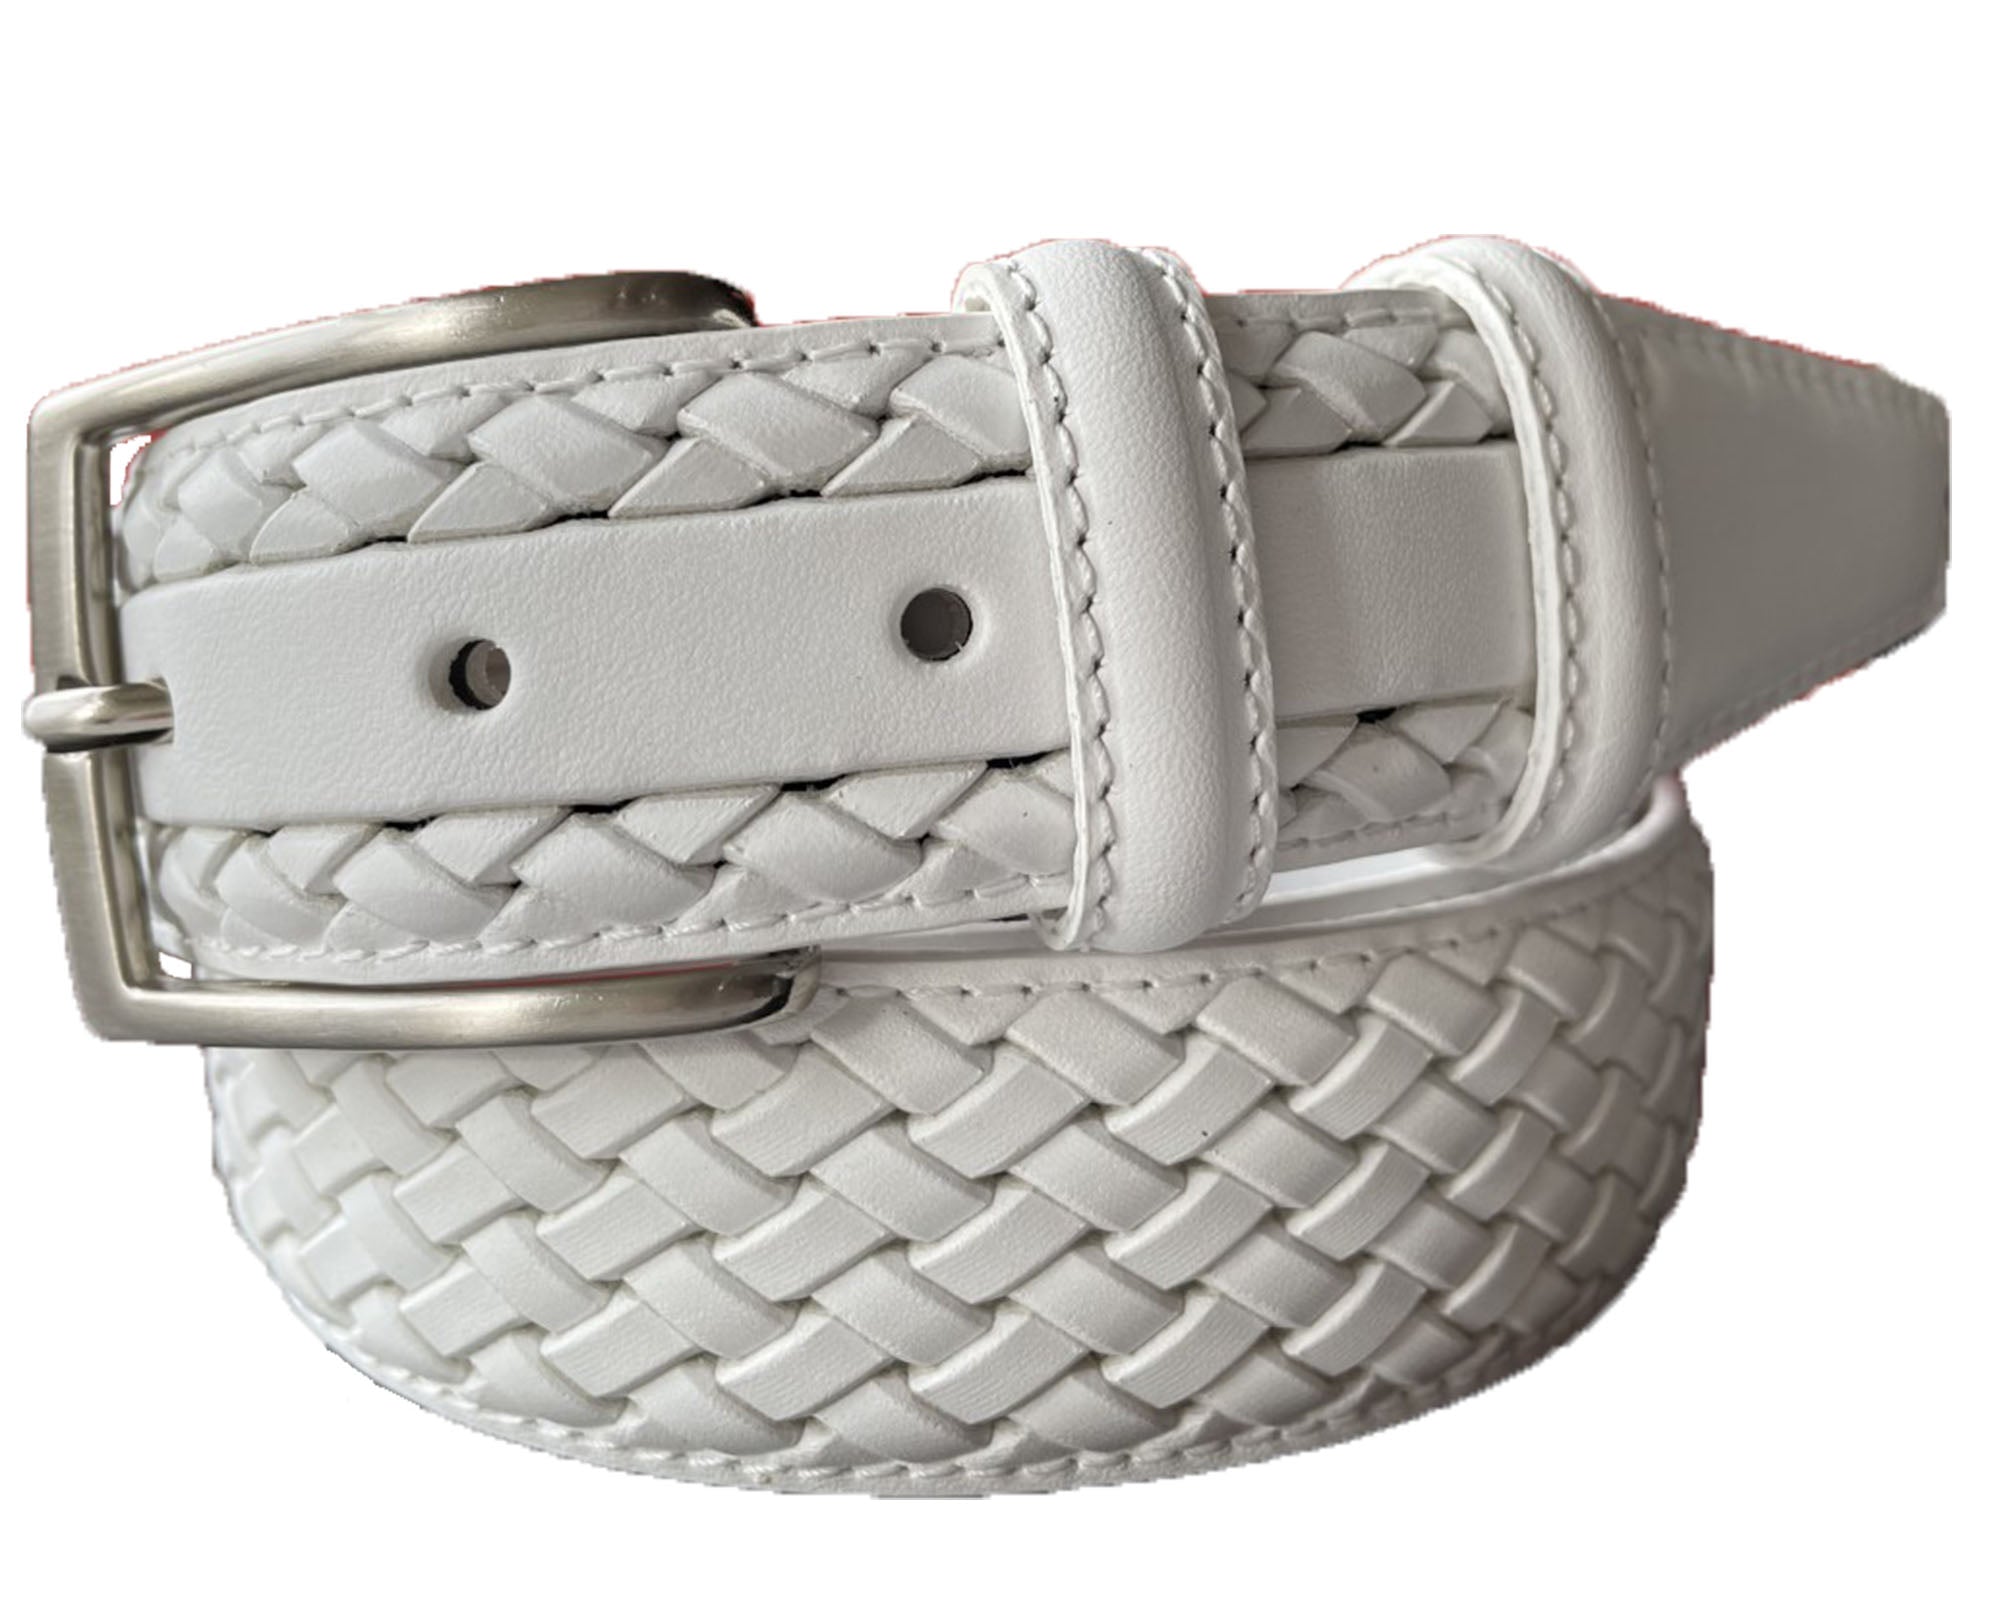 WHITE CALF LEATHER BRAID WEAVE EMBOSSED 35MM LEATHER BELT